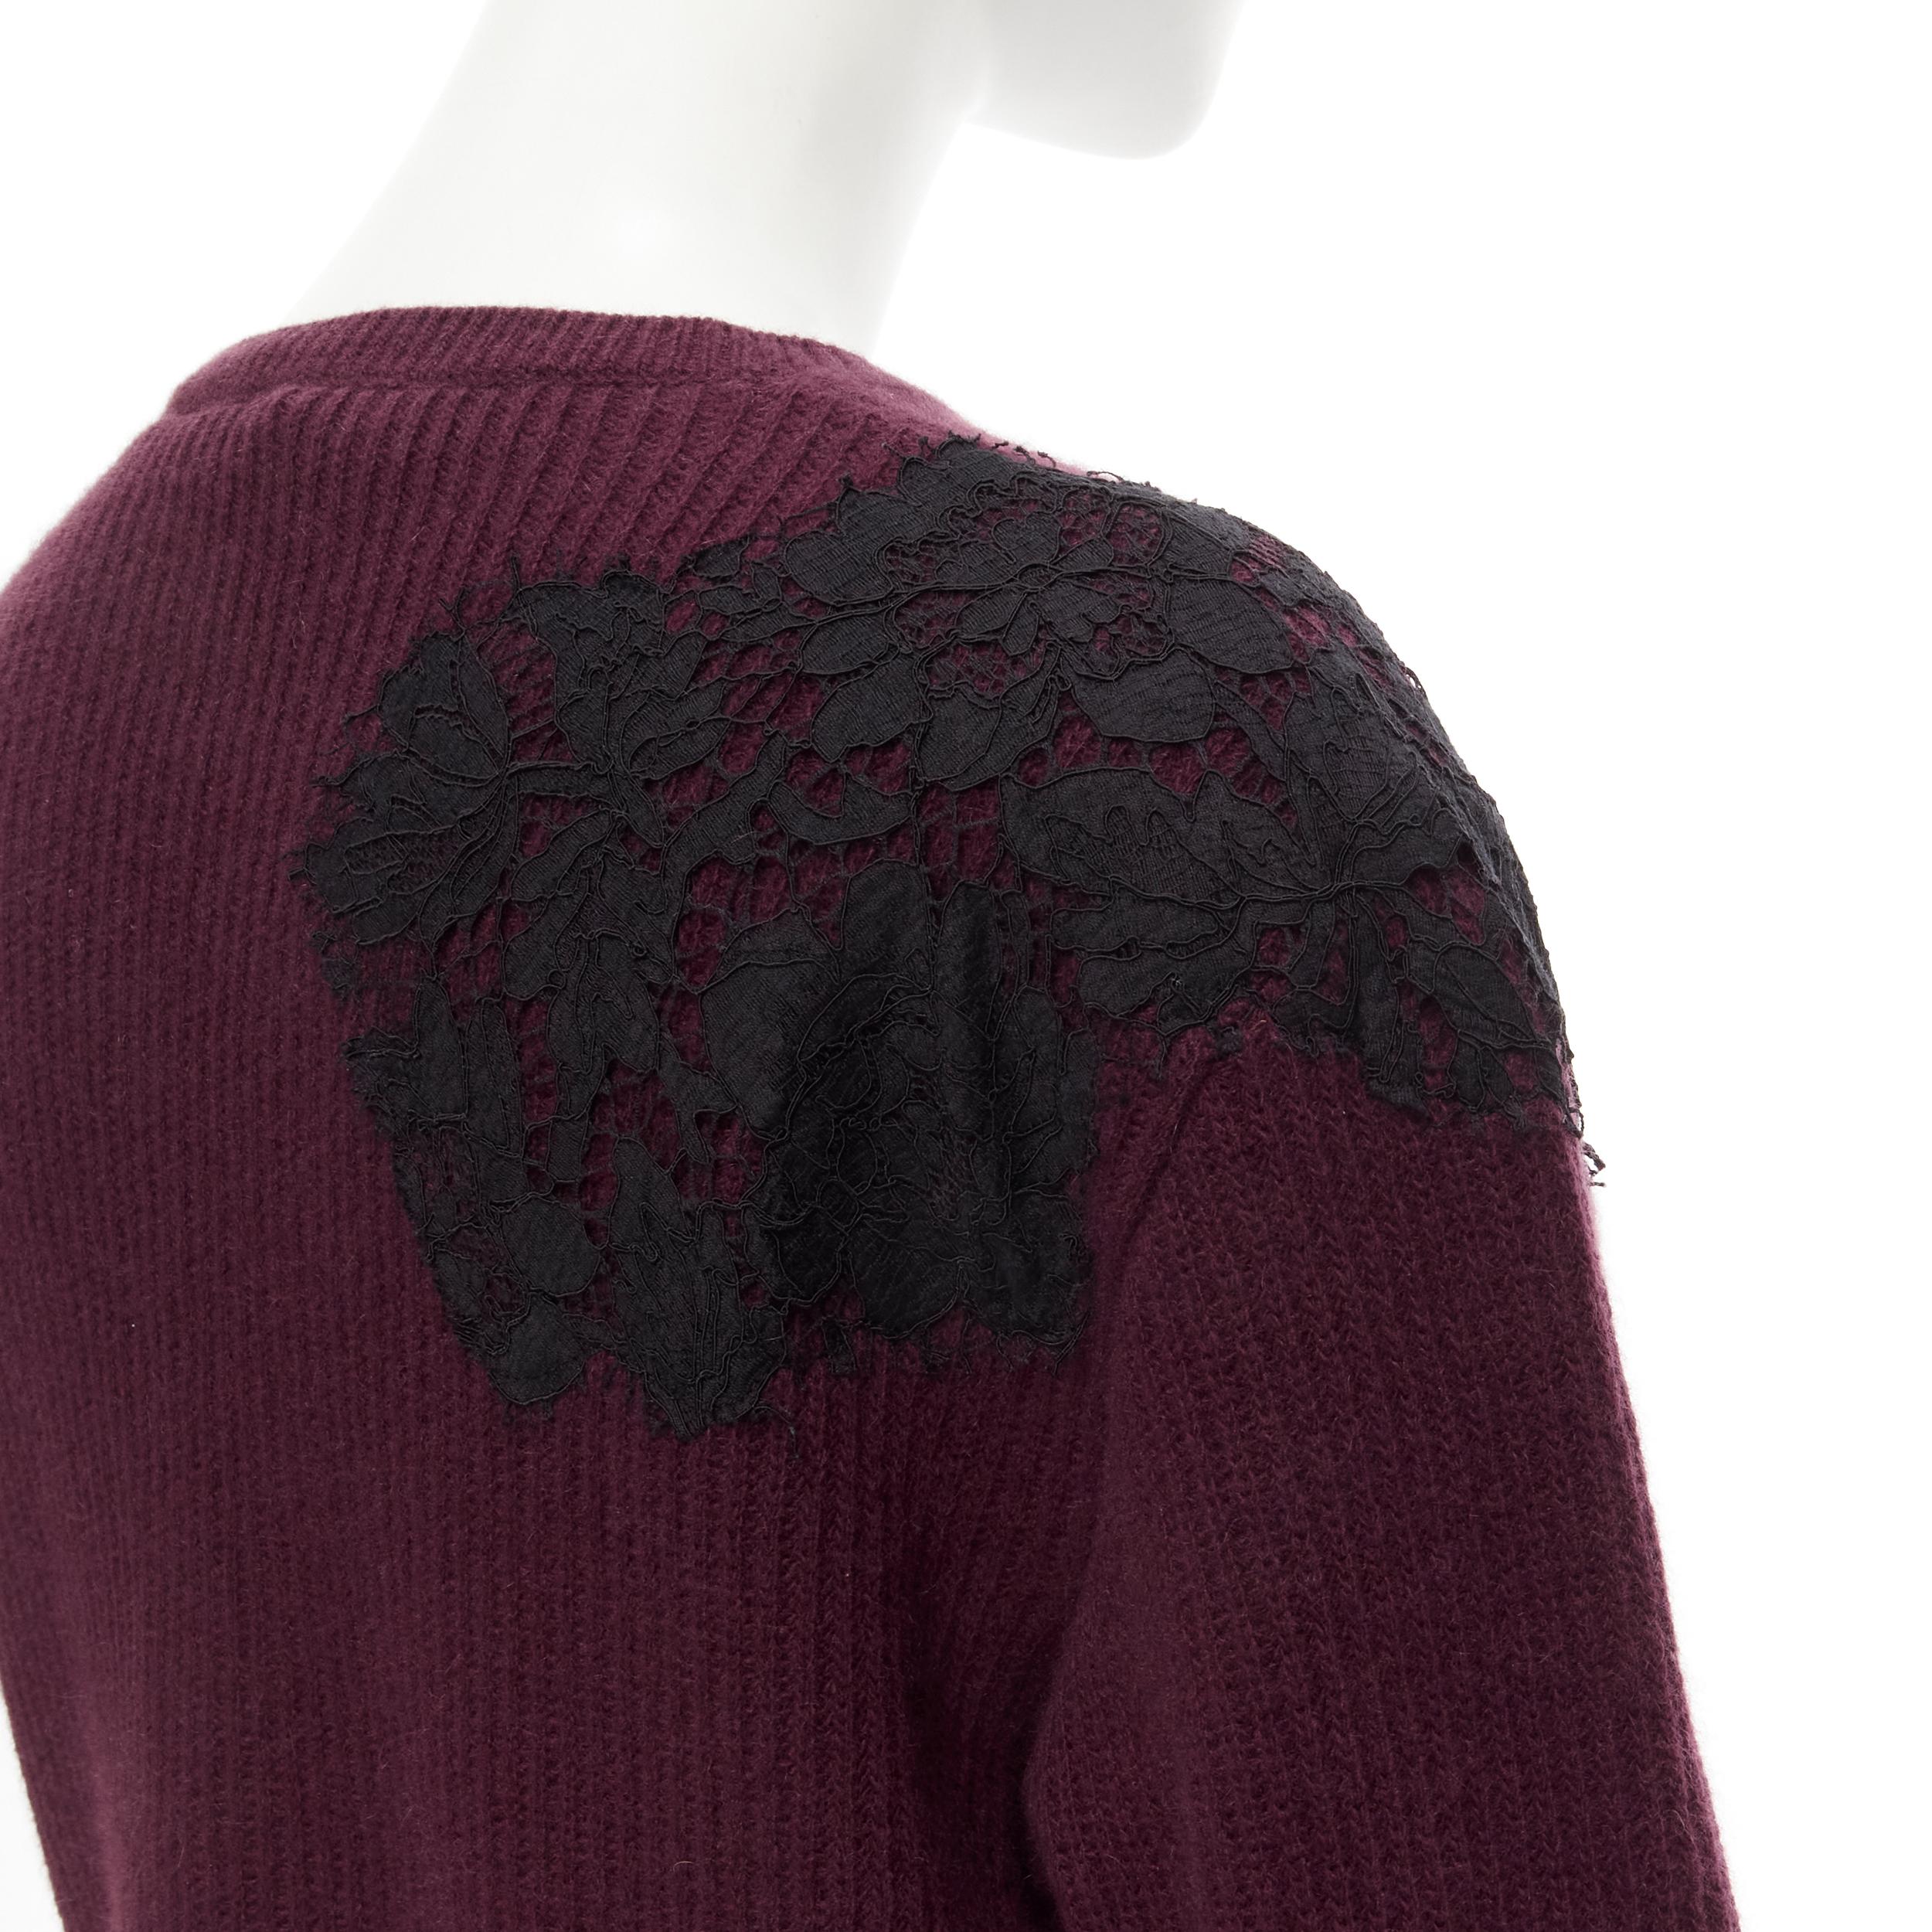 VALENTINO burgundy red virgin wool cashmere black floral lace applique sweater  For Sale 2